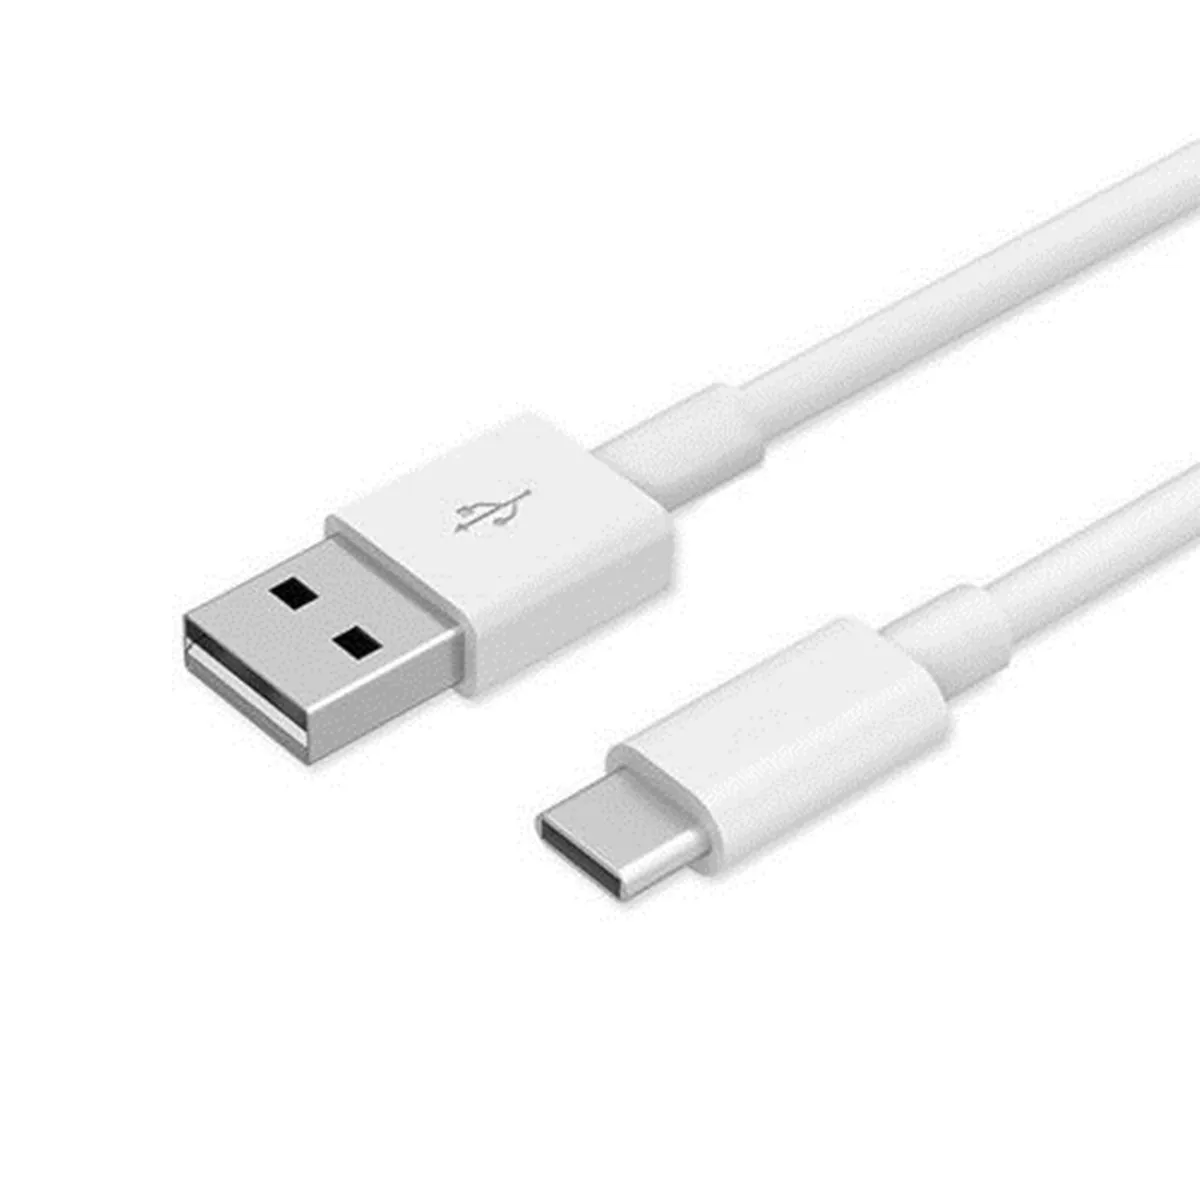 Charger Cable USB 3.0 3.1 USB A Male to Type C Cable Fast Charger wire for mobile phone notebook 15